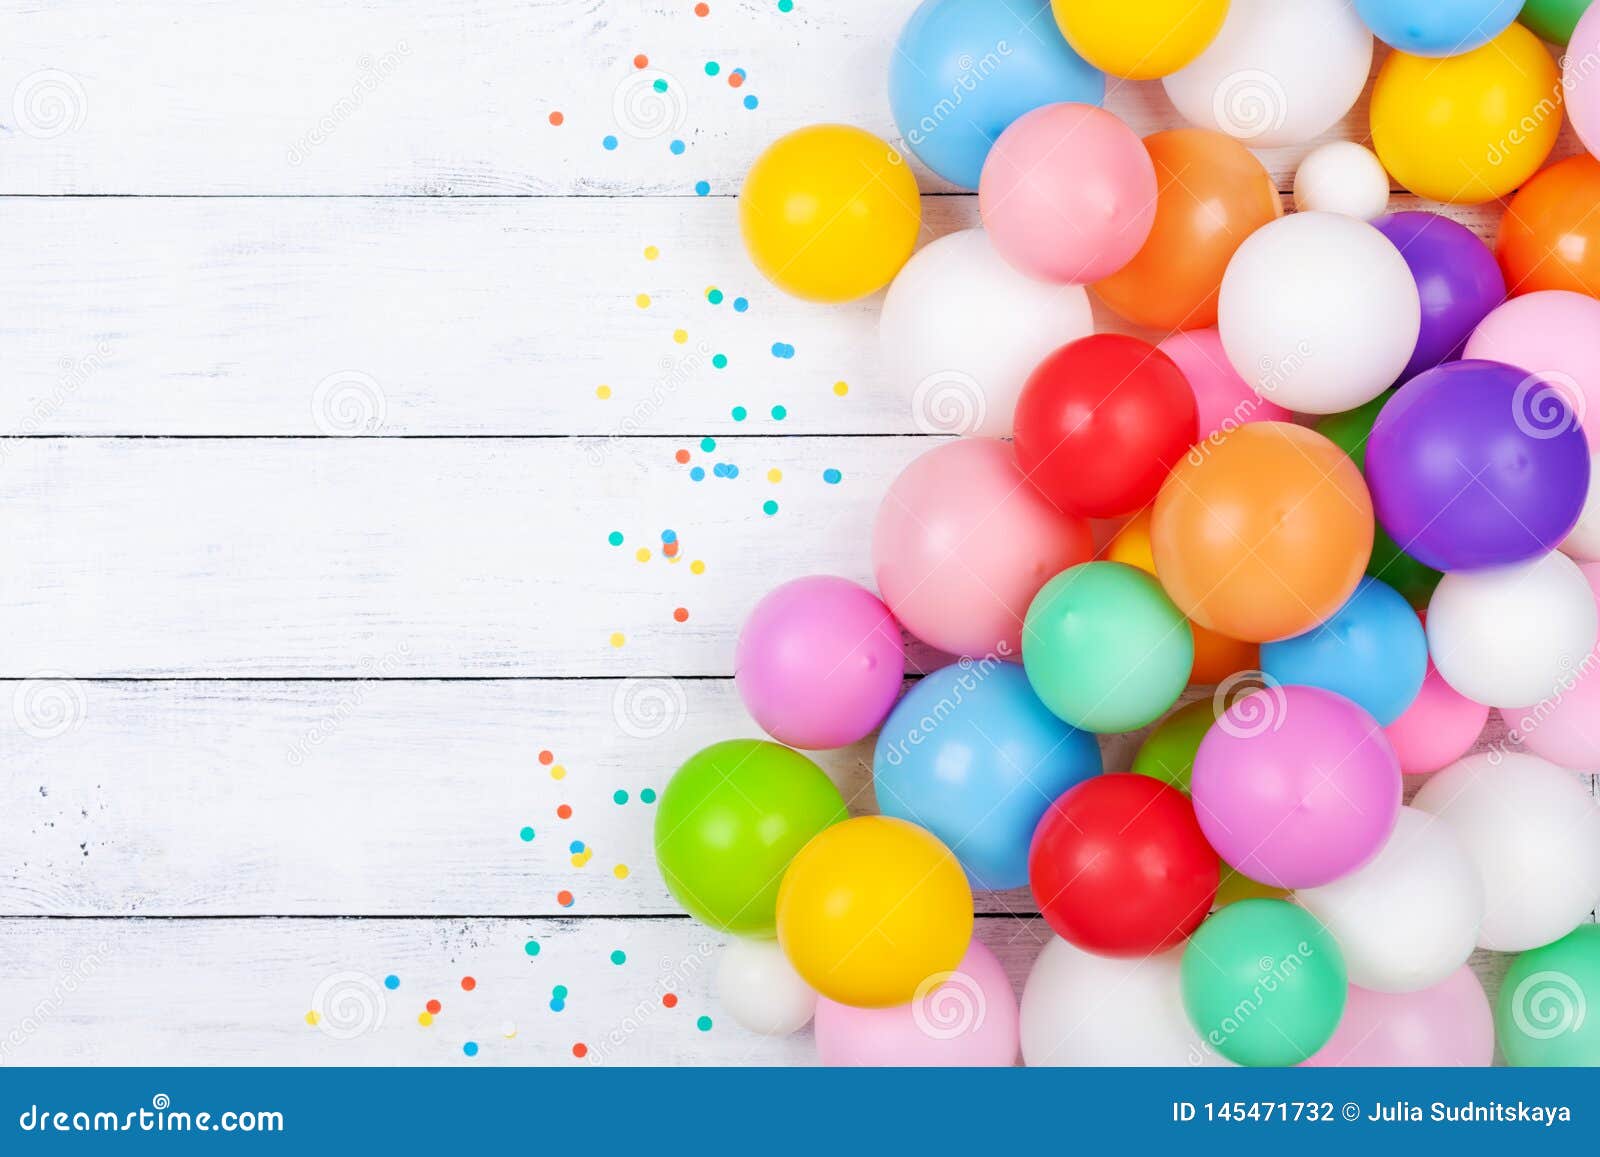 50,227 Background Colorful Balloons Stock Photos - Free & Royalty-Free  Stock Photos from Dreamstime